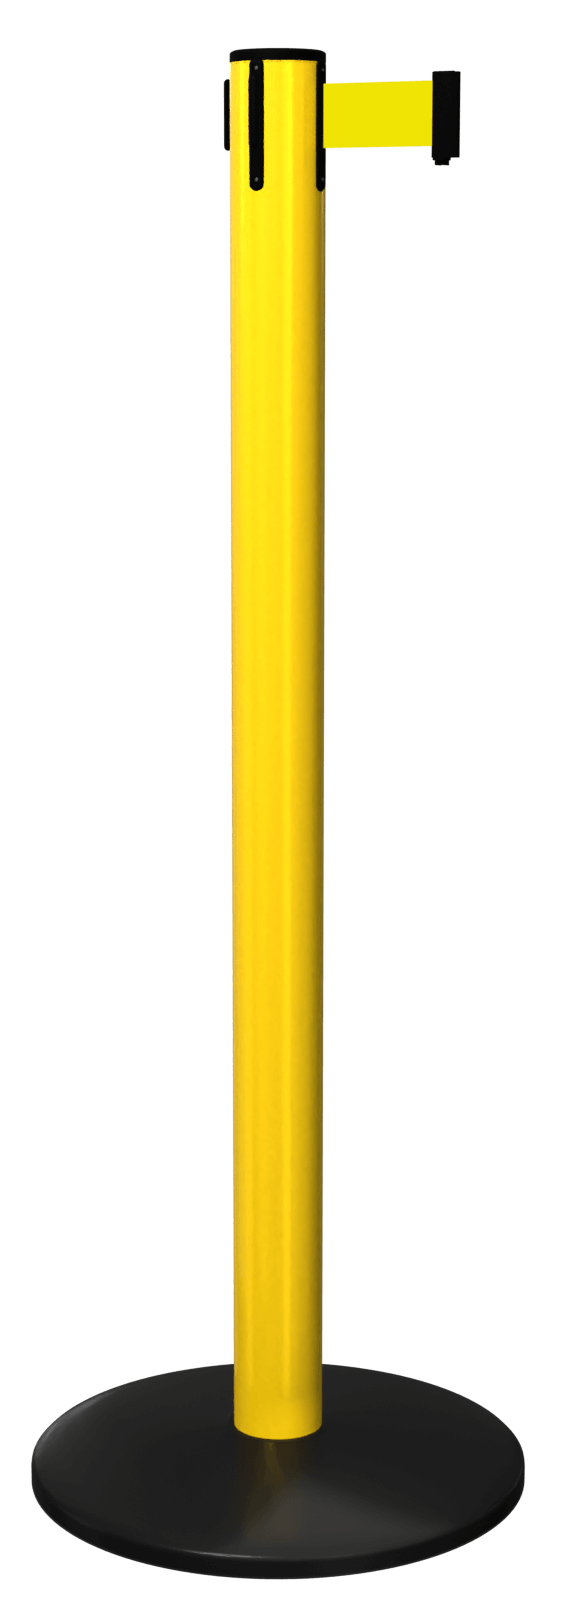 SafetyPro Retractable Barrier Post in Yellow with Yellow Tape